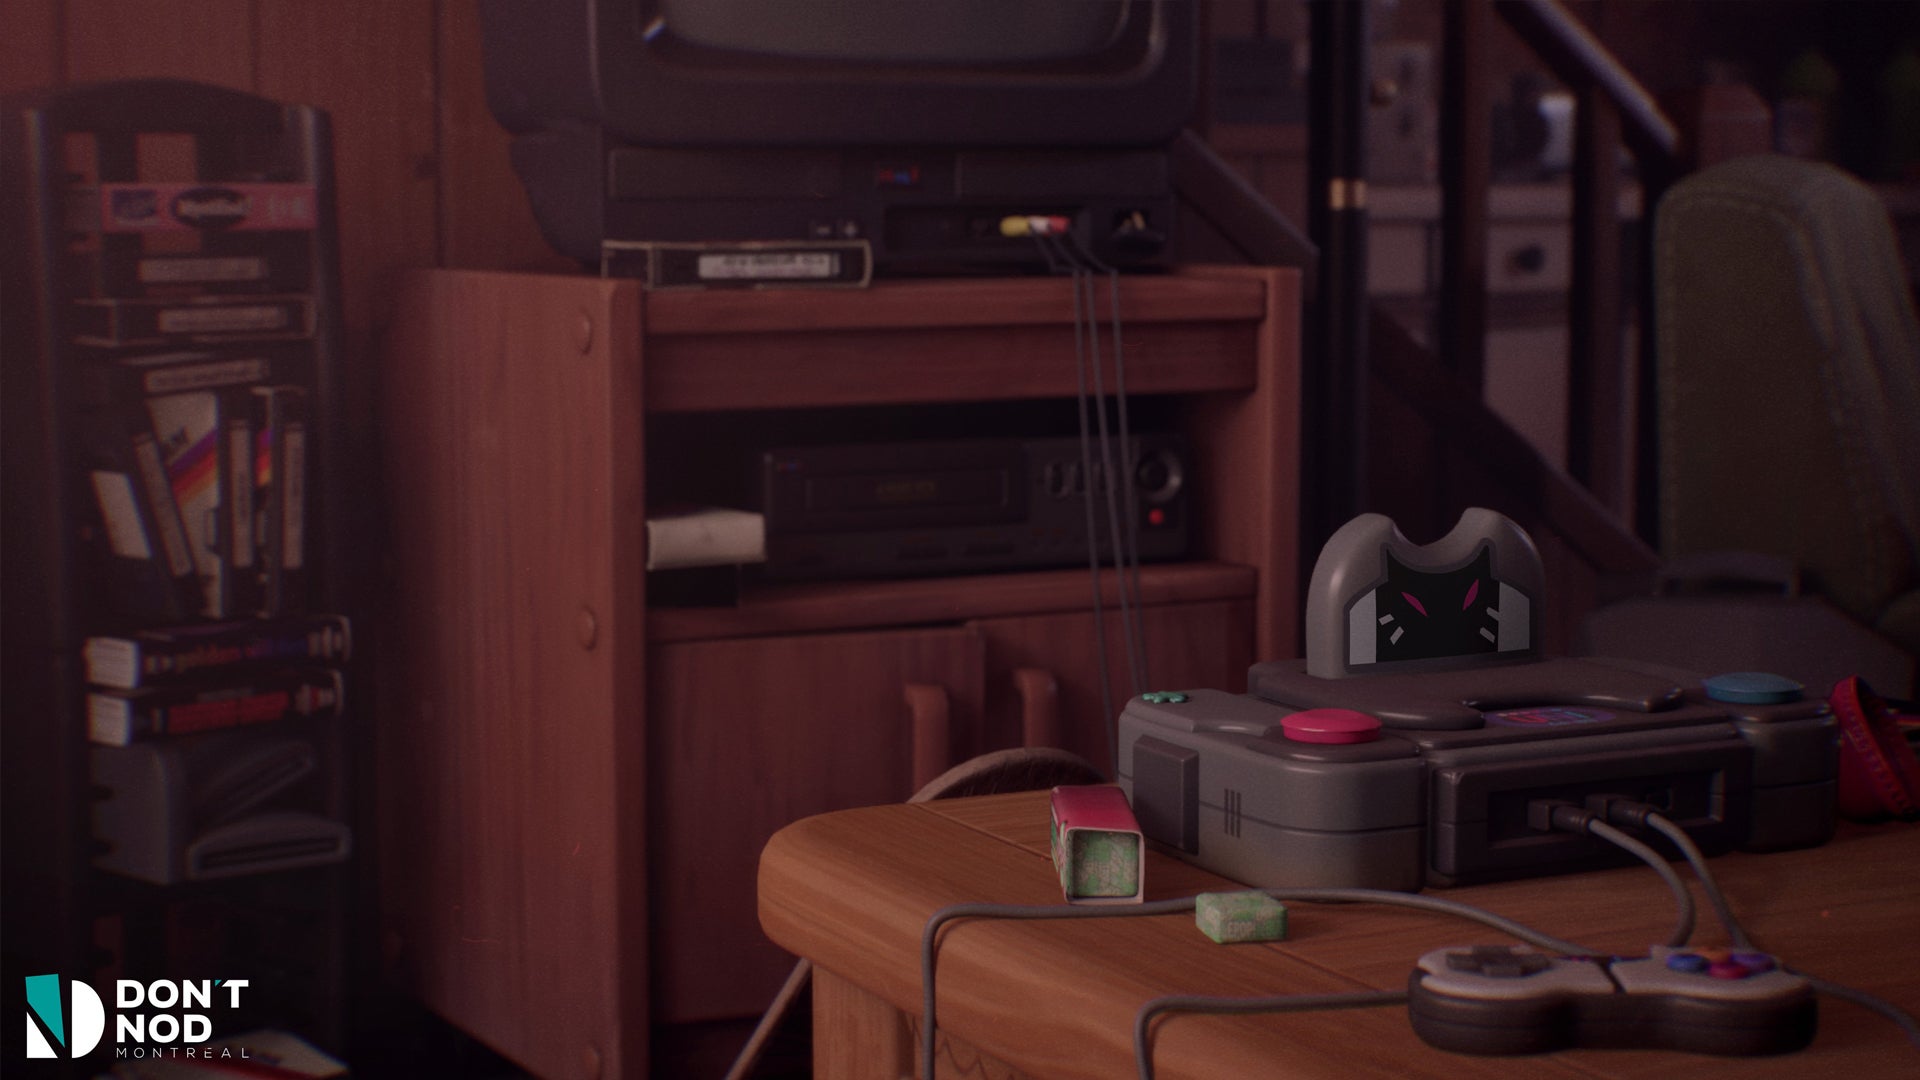 Image for Life is Strange developer Don't Nod has teased a new game that looks very 90s